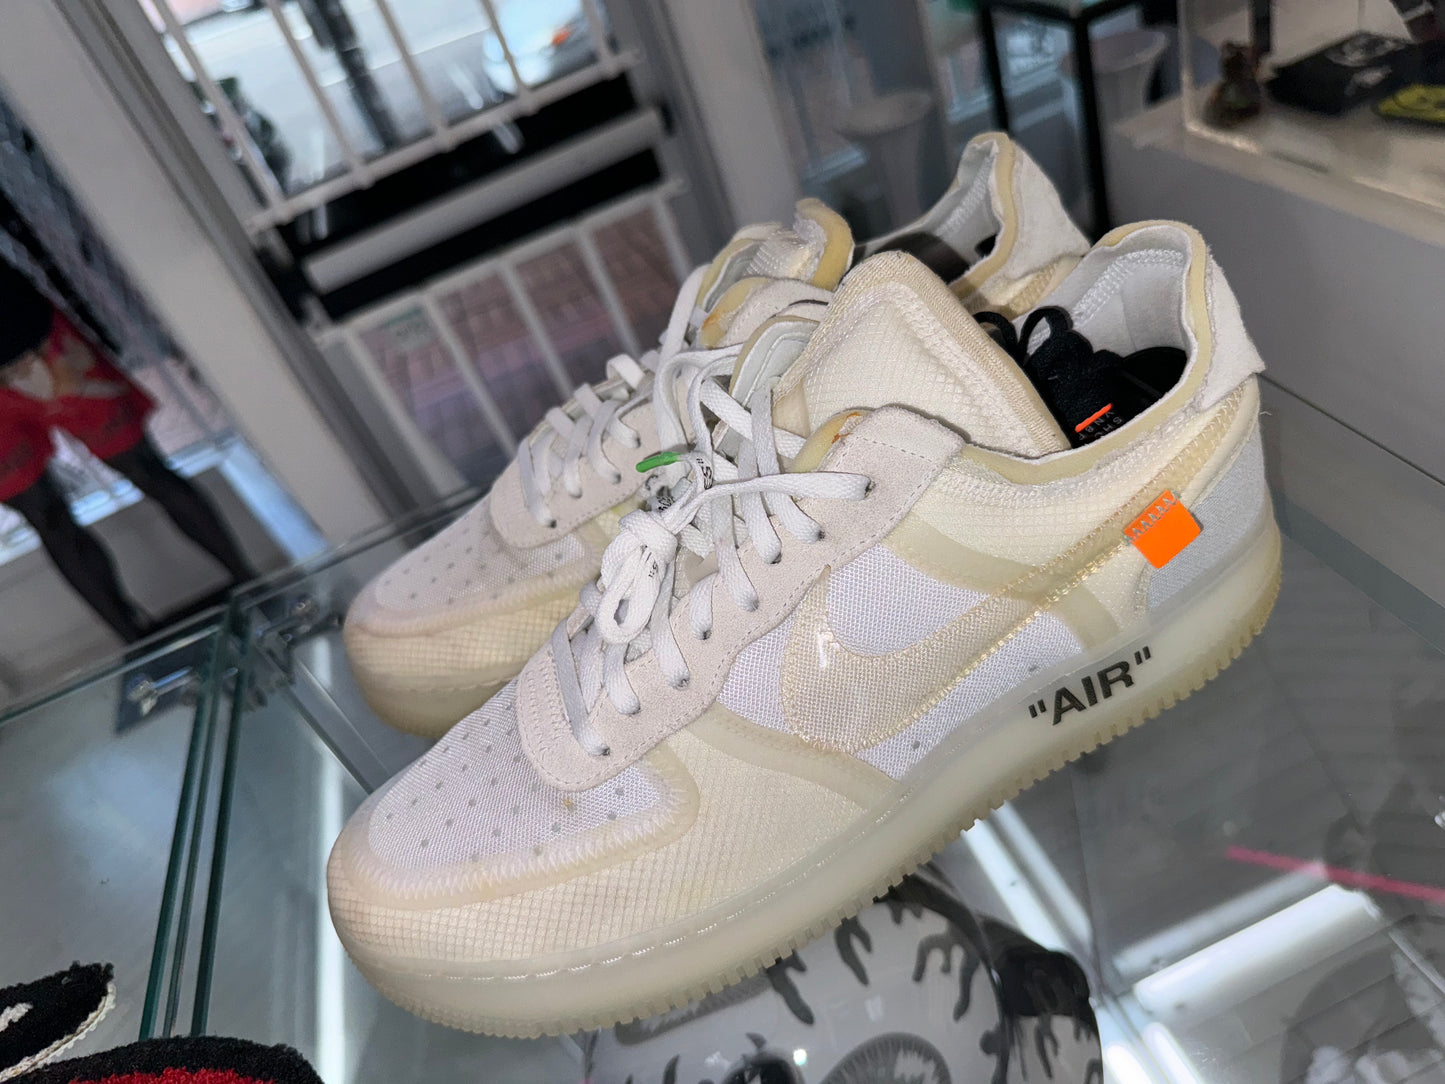 Off White x Nike Air Force 1 Low The Ten Size 11.5 us Virgil Abloh